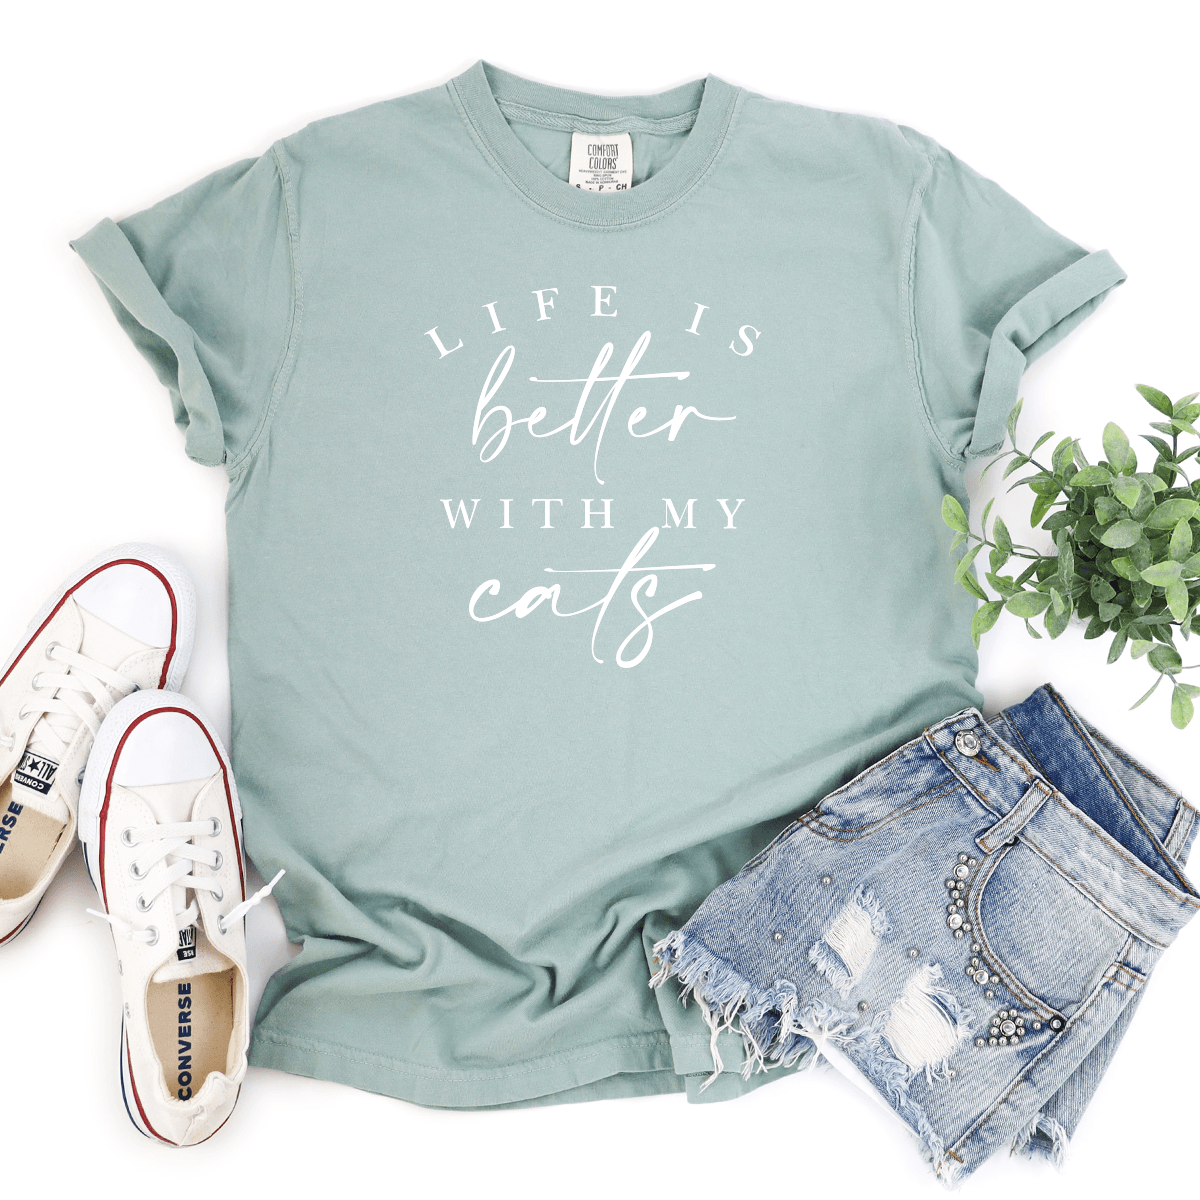 Life Is Better With My Cats - Premium Wash Tee